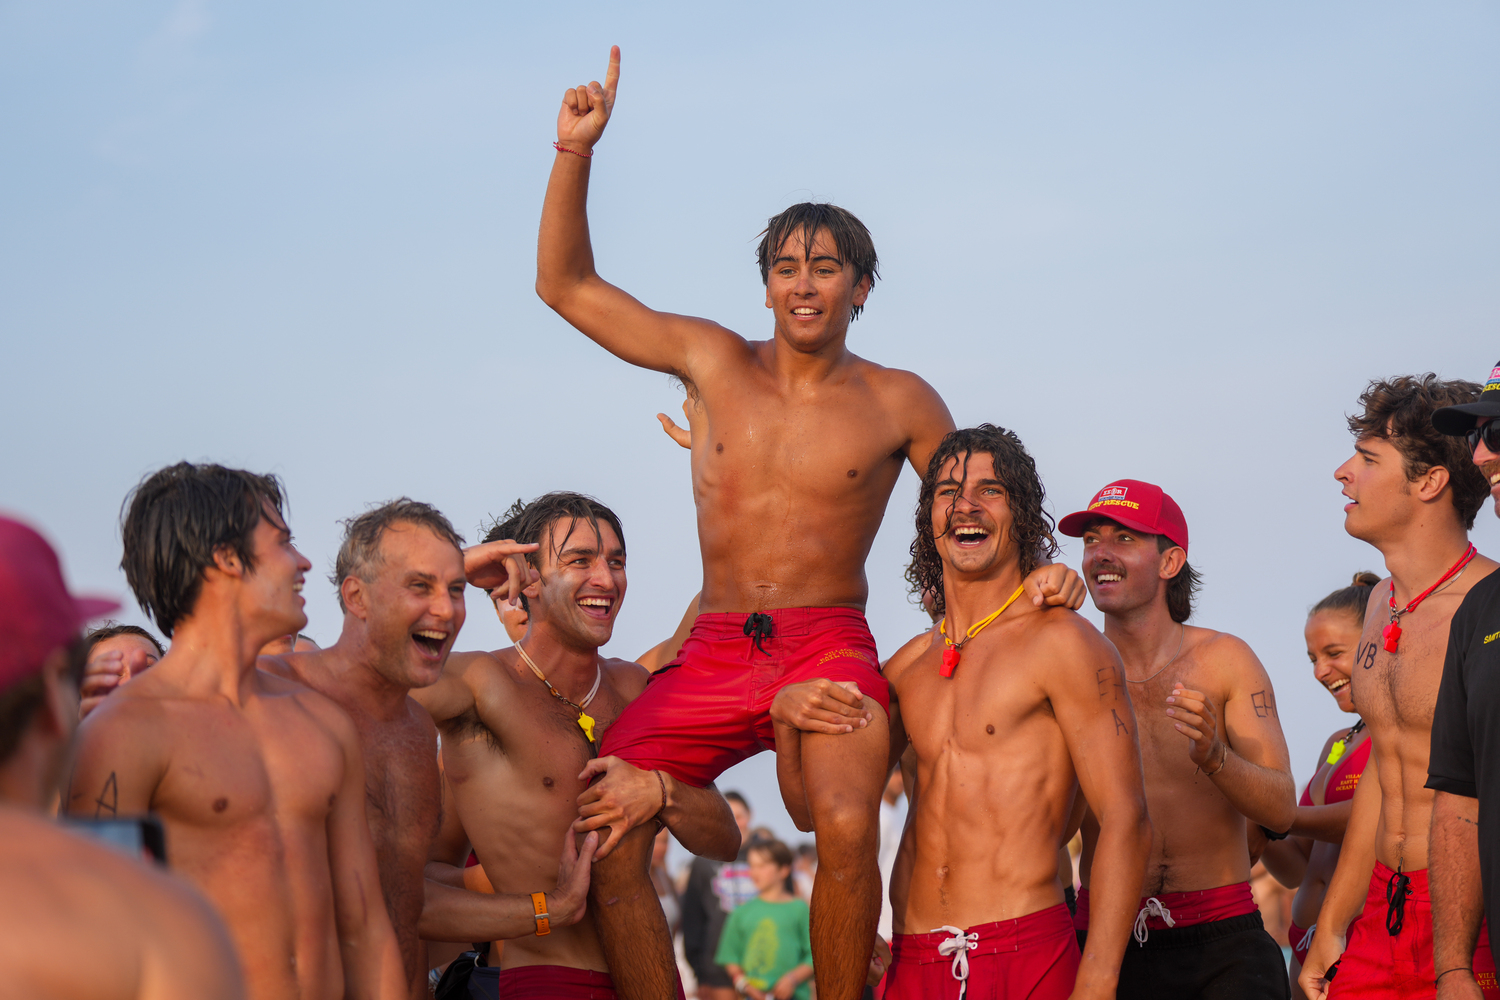 East Hampton Village Lifeguard J.P. Amaden gets hoisted up by fellow lifeguards Avery Sharen and Frankie Hammer after winning the paddle board relay. RON ESPOSITO